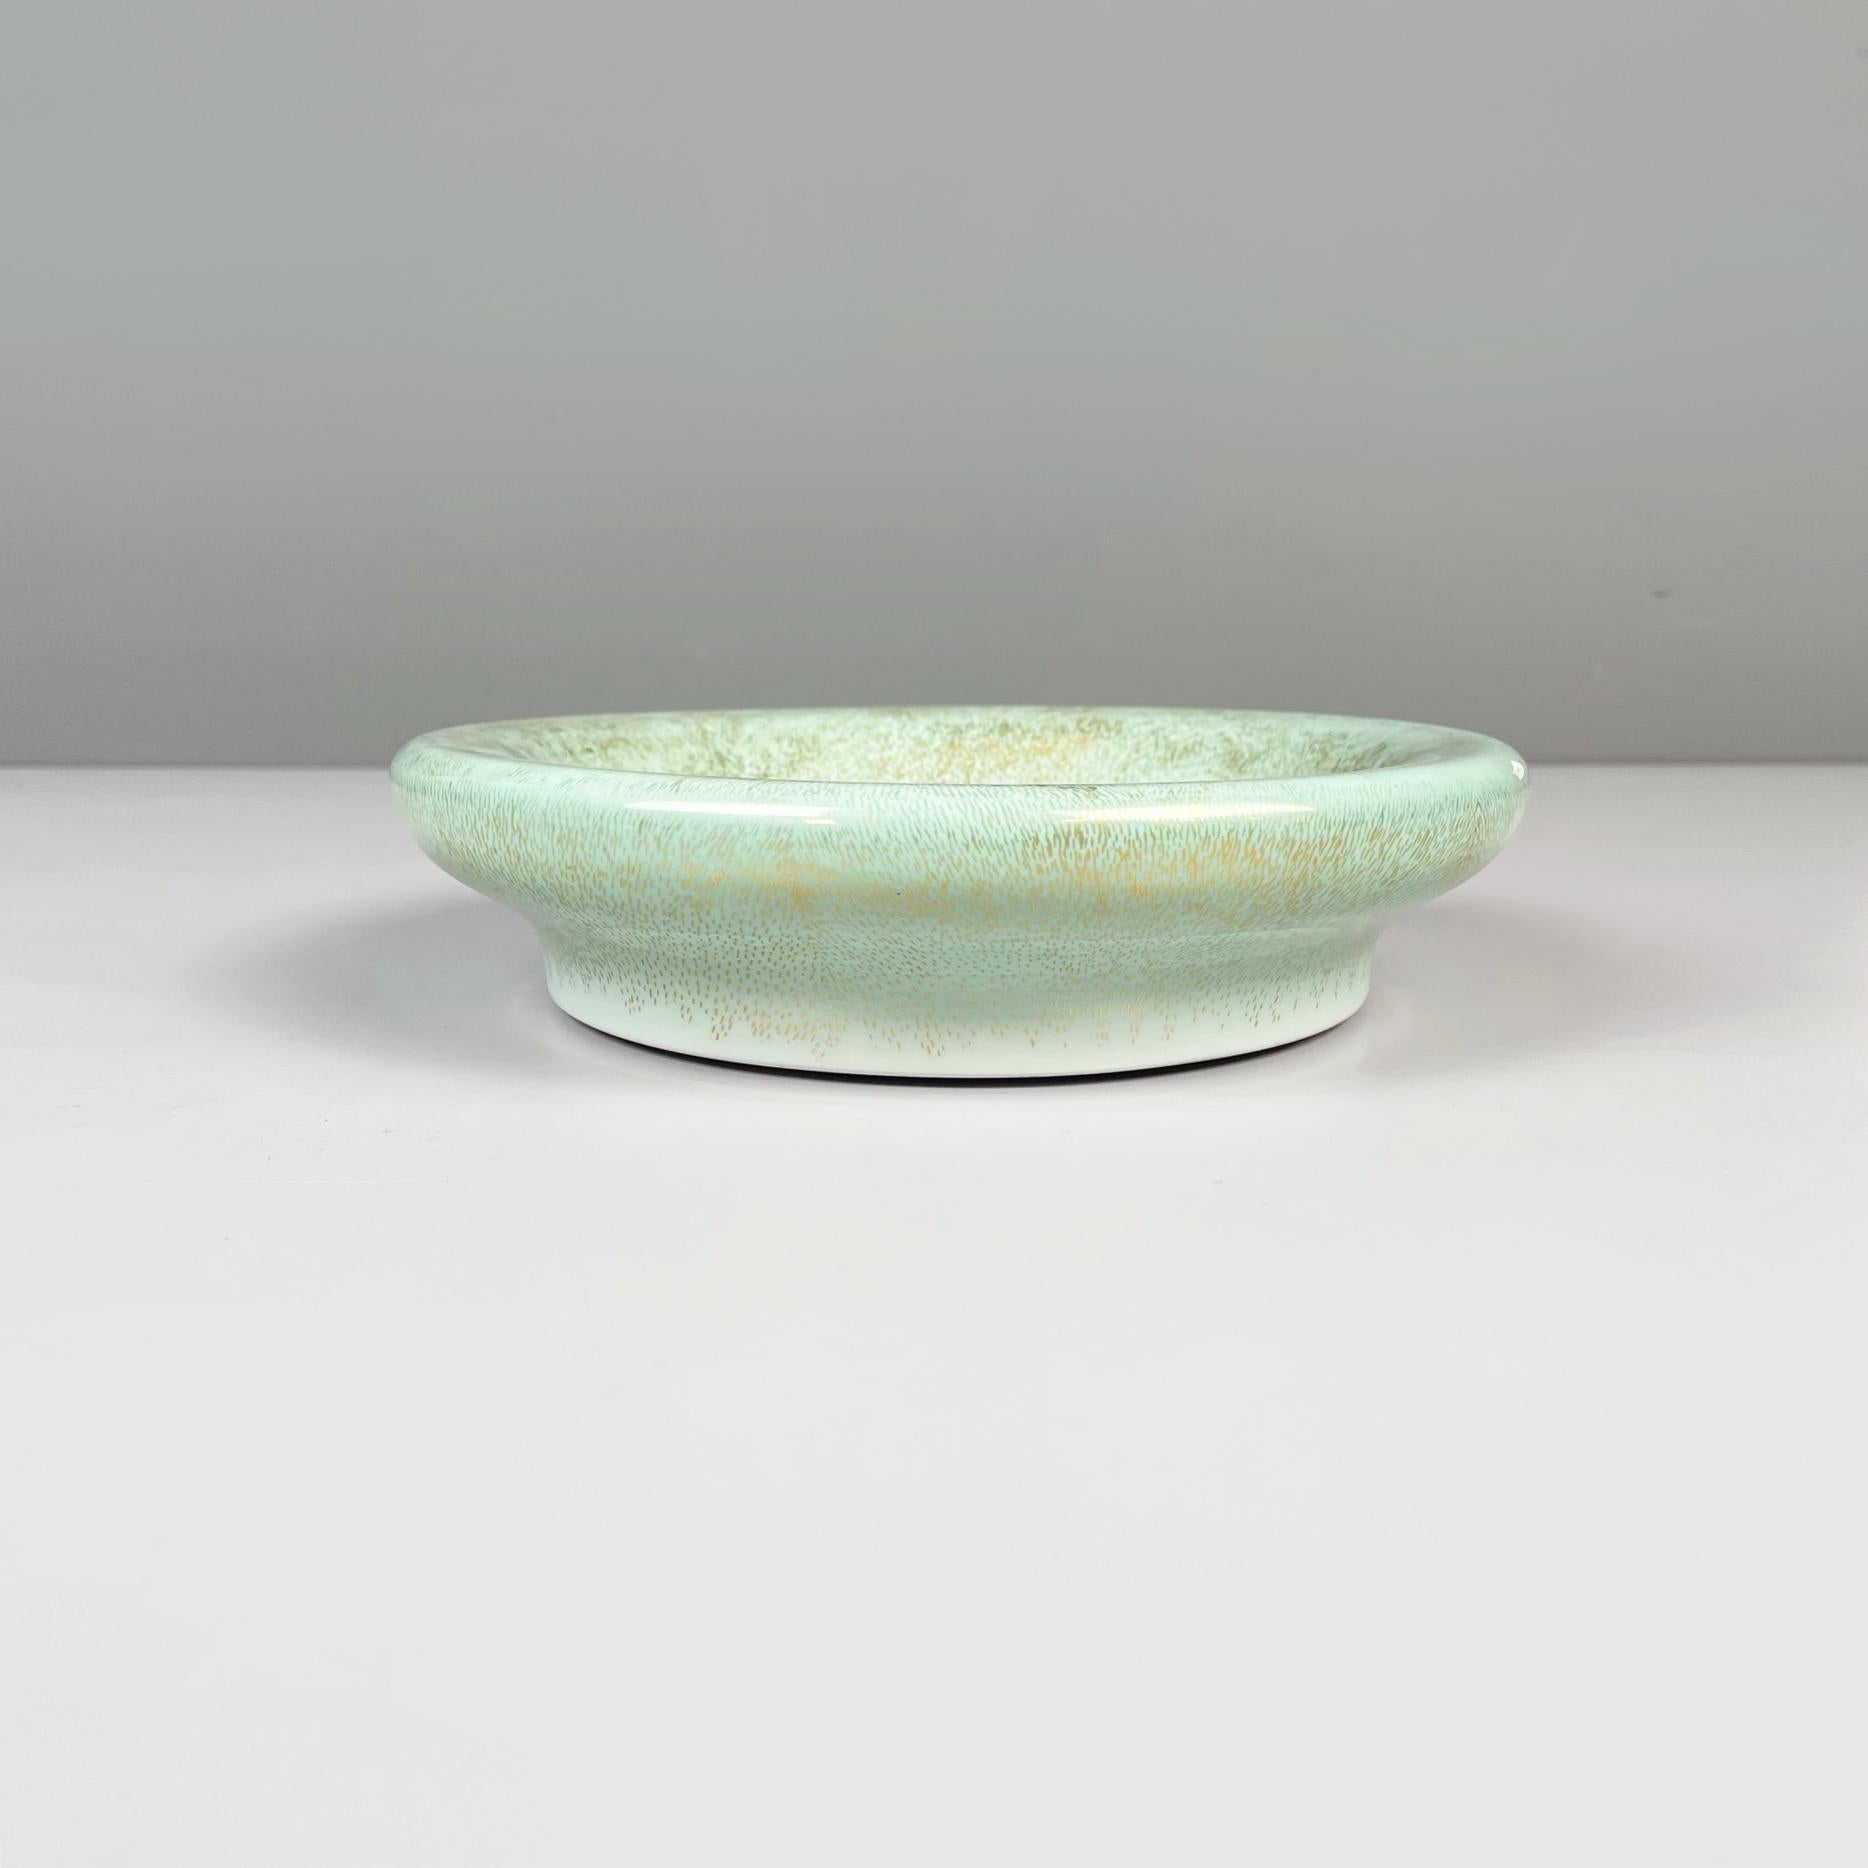 Italian midcentury Green light blue ceramic centerpiece by Mangani, 1960s.
Plate centerpiece with round base in ceramic: white in the center and blue-green sides with golden details. It can also used as pocket emptier bowl.
Produced by Mangani in